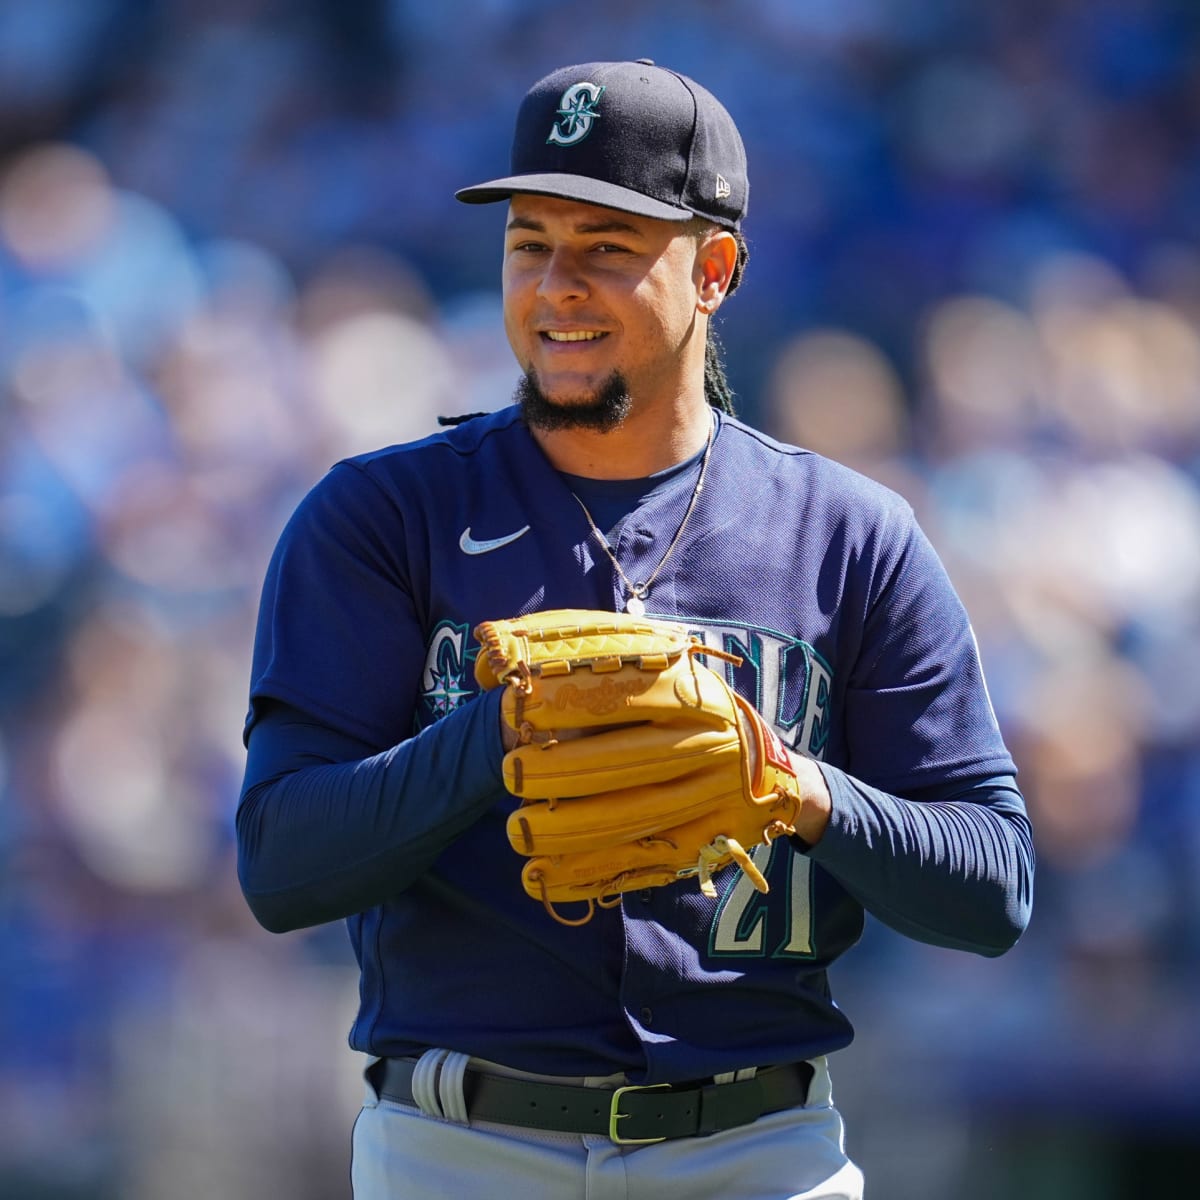 Mariners' Luis Castillo lined up to face Yankees again next week